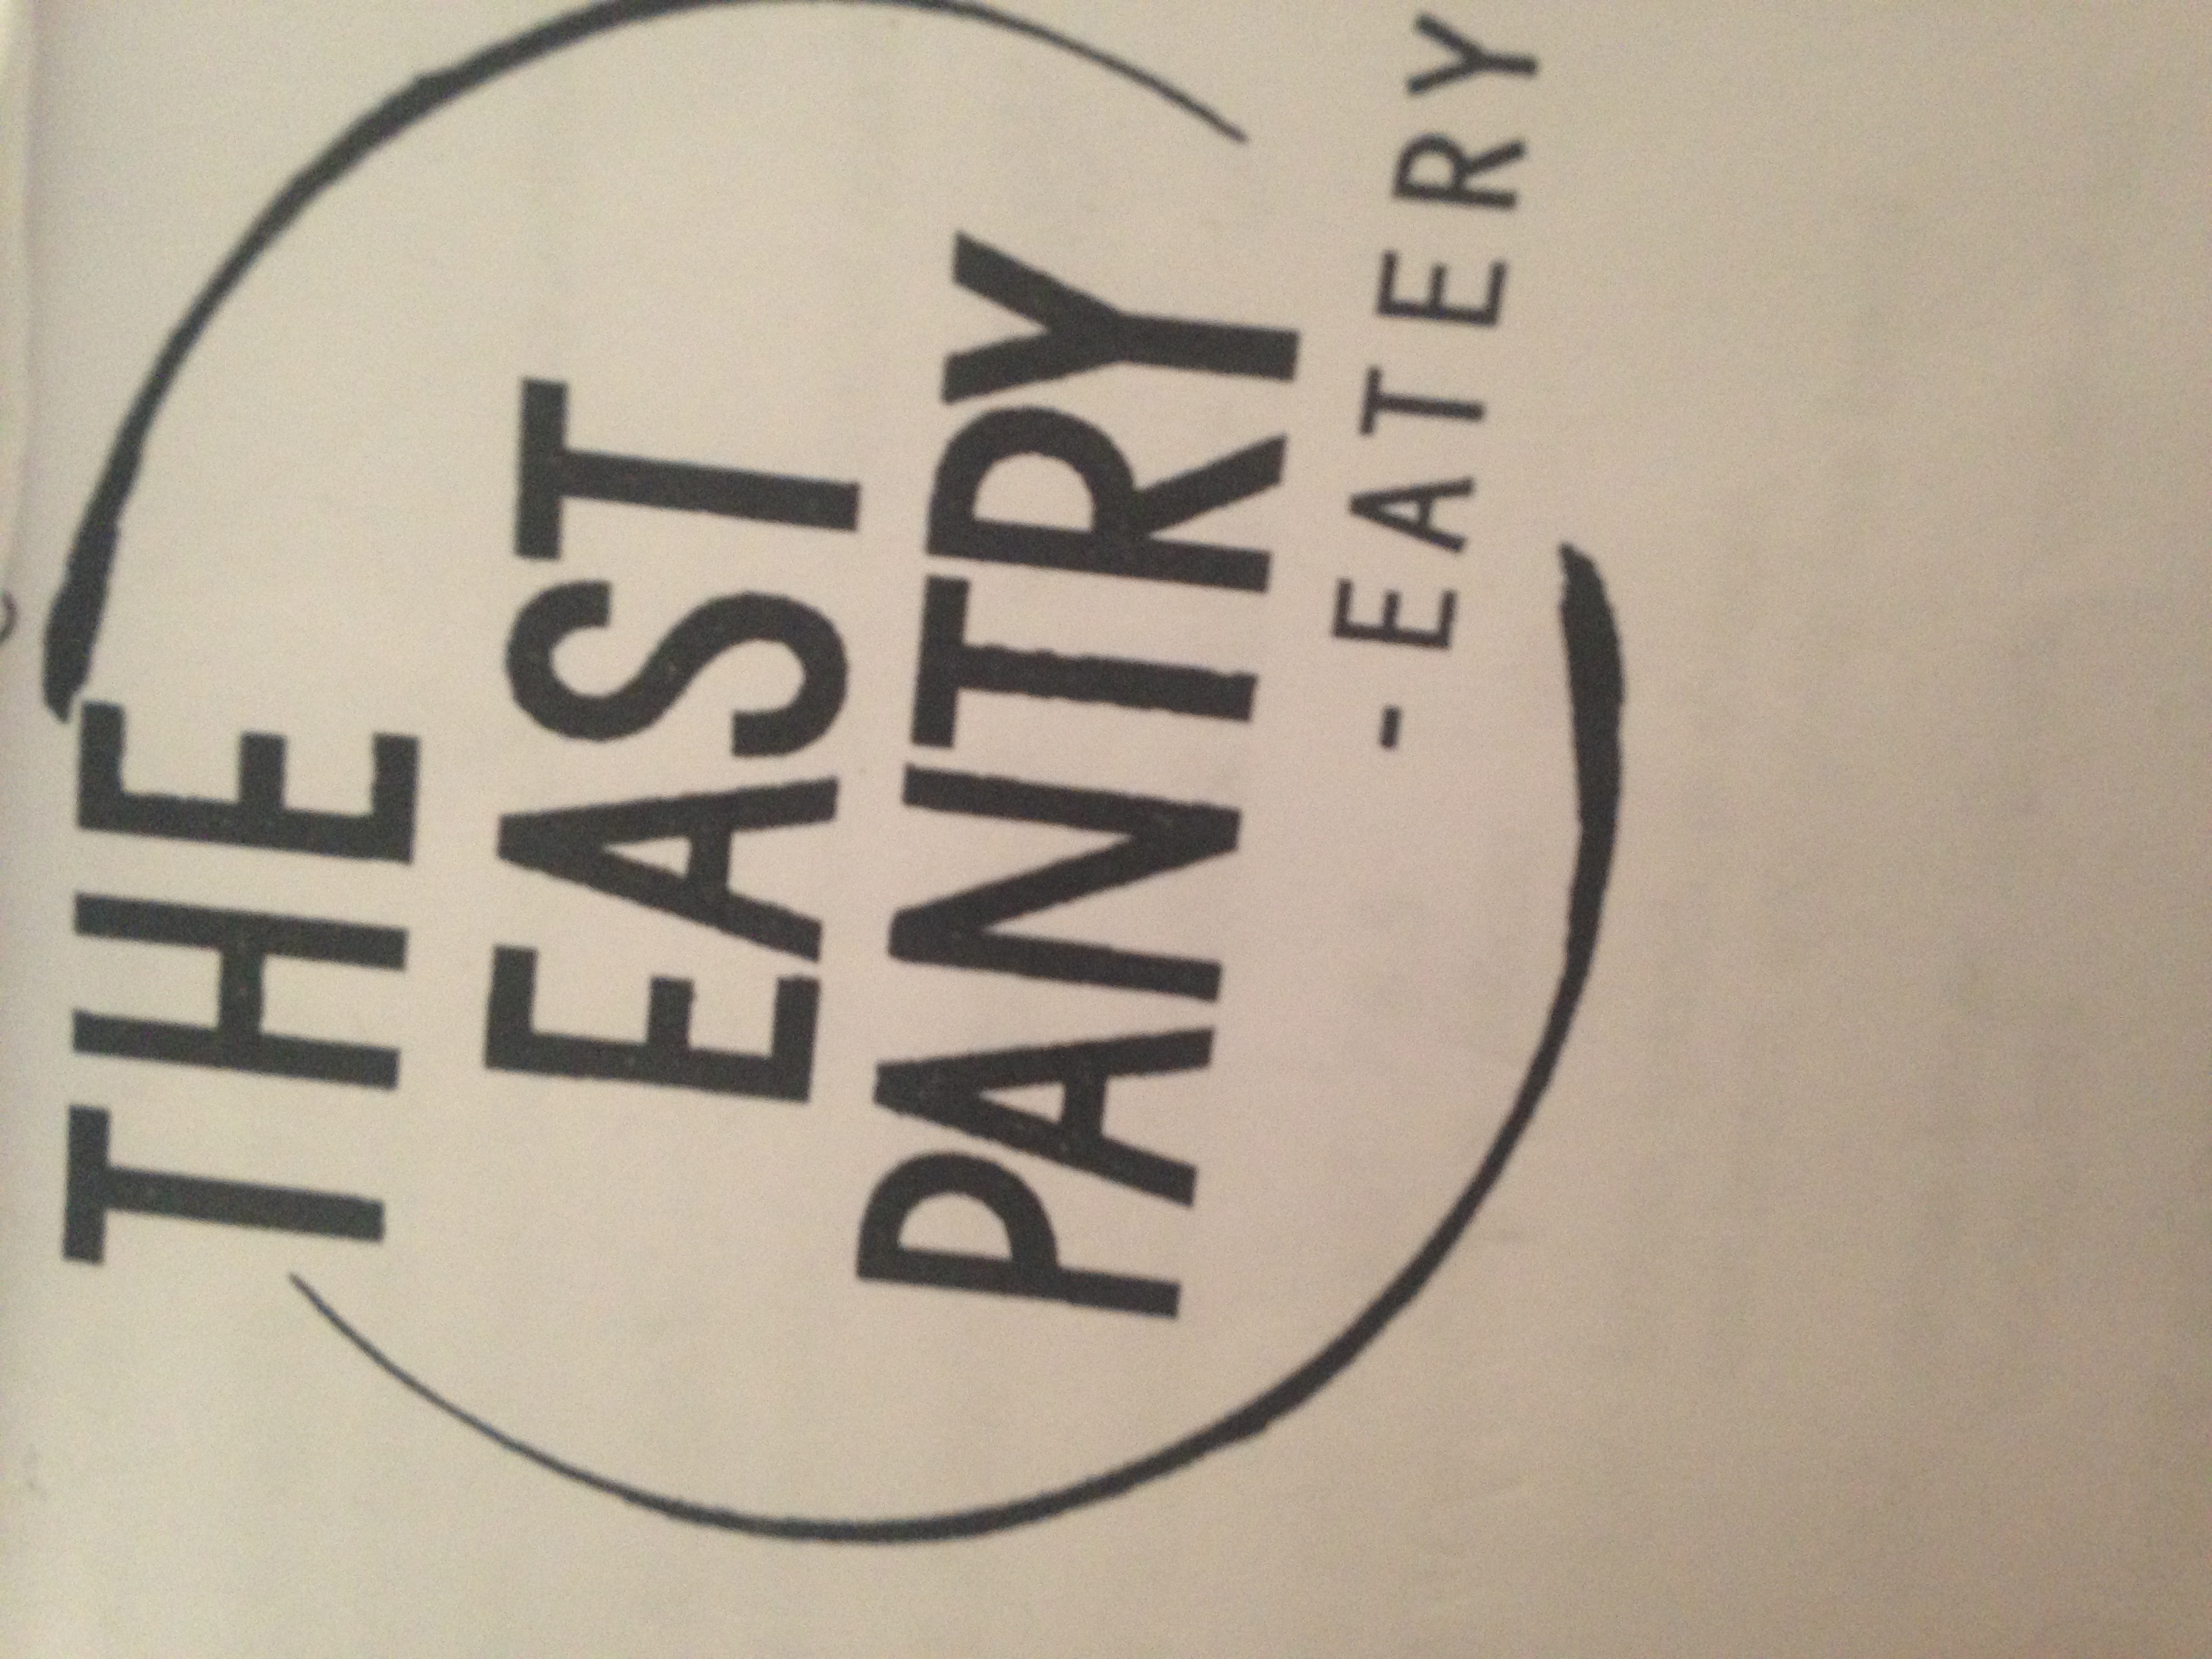 The East Pantry